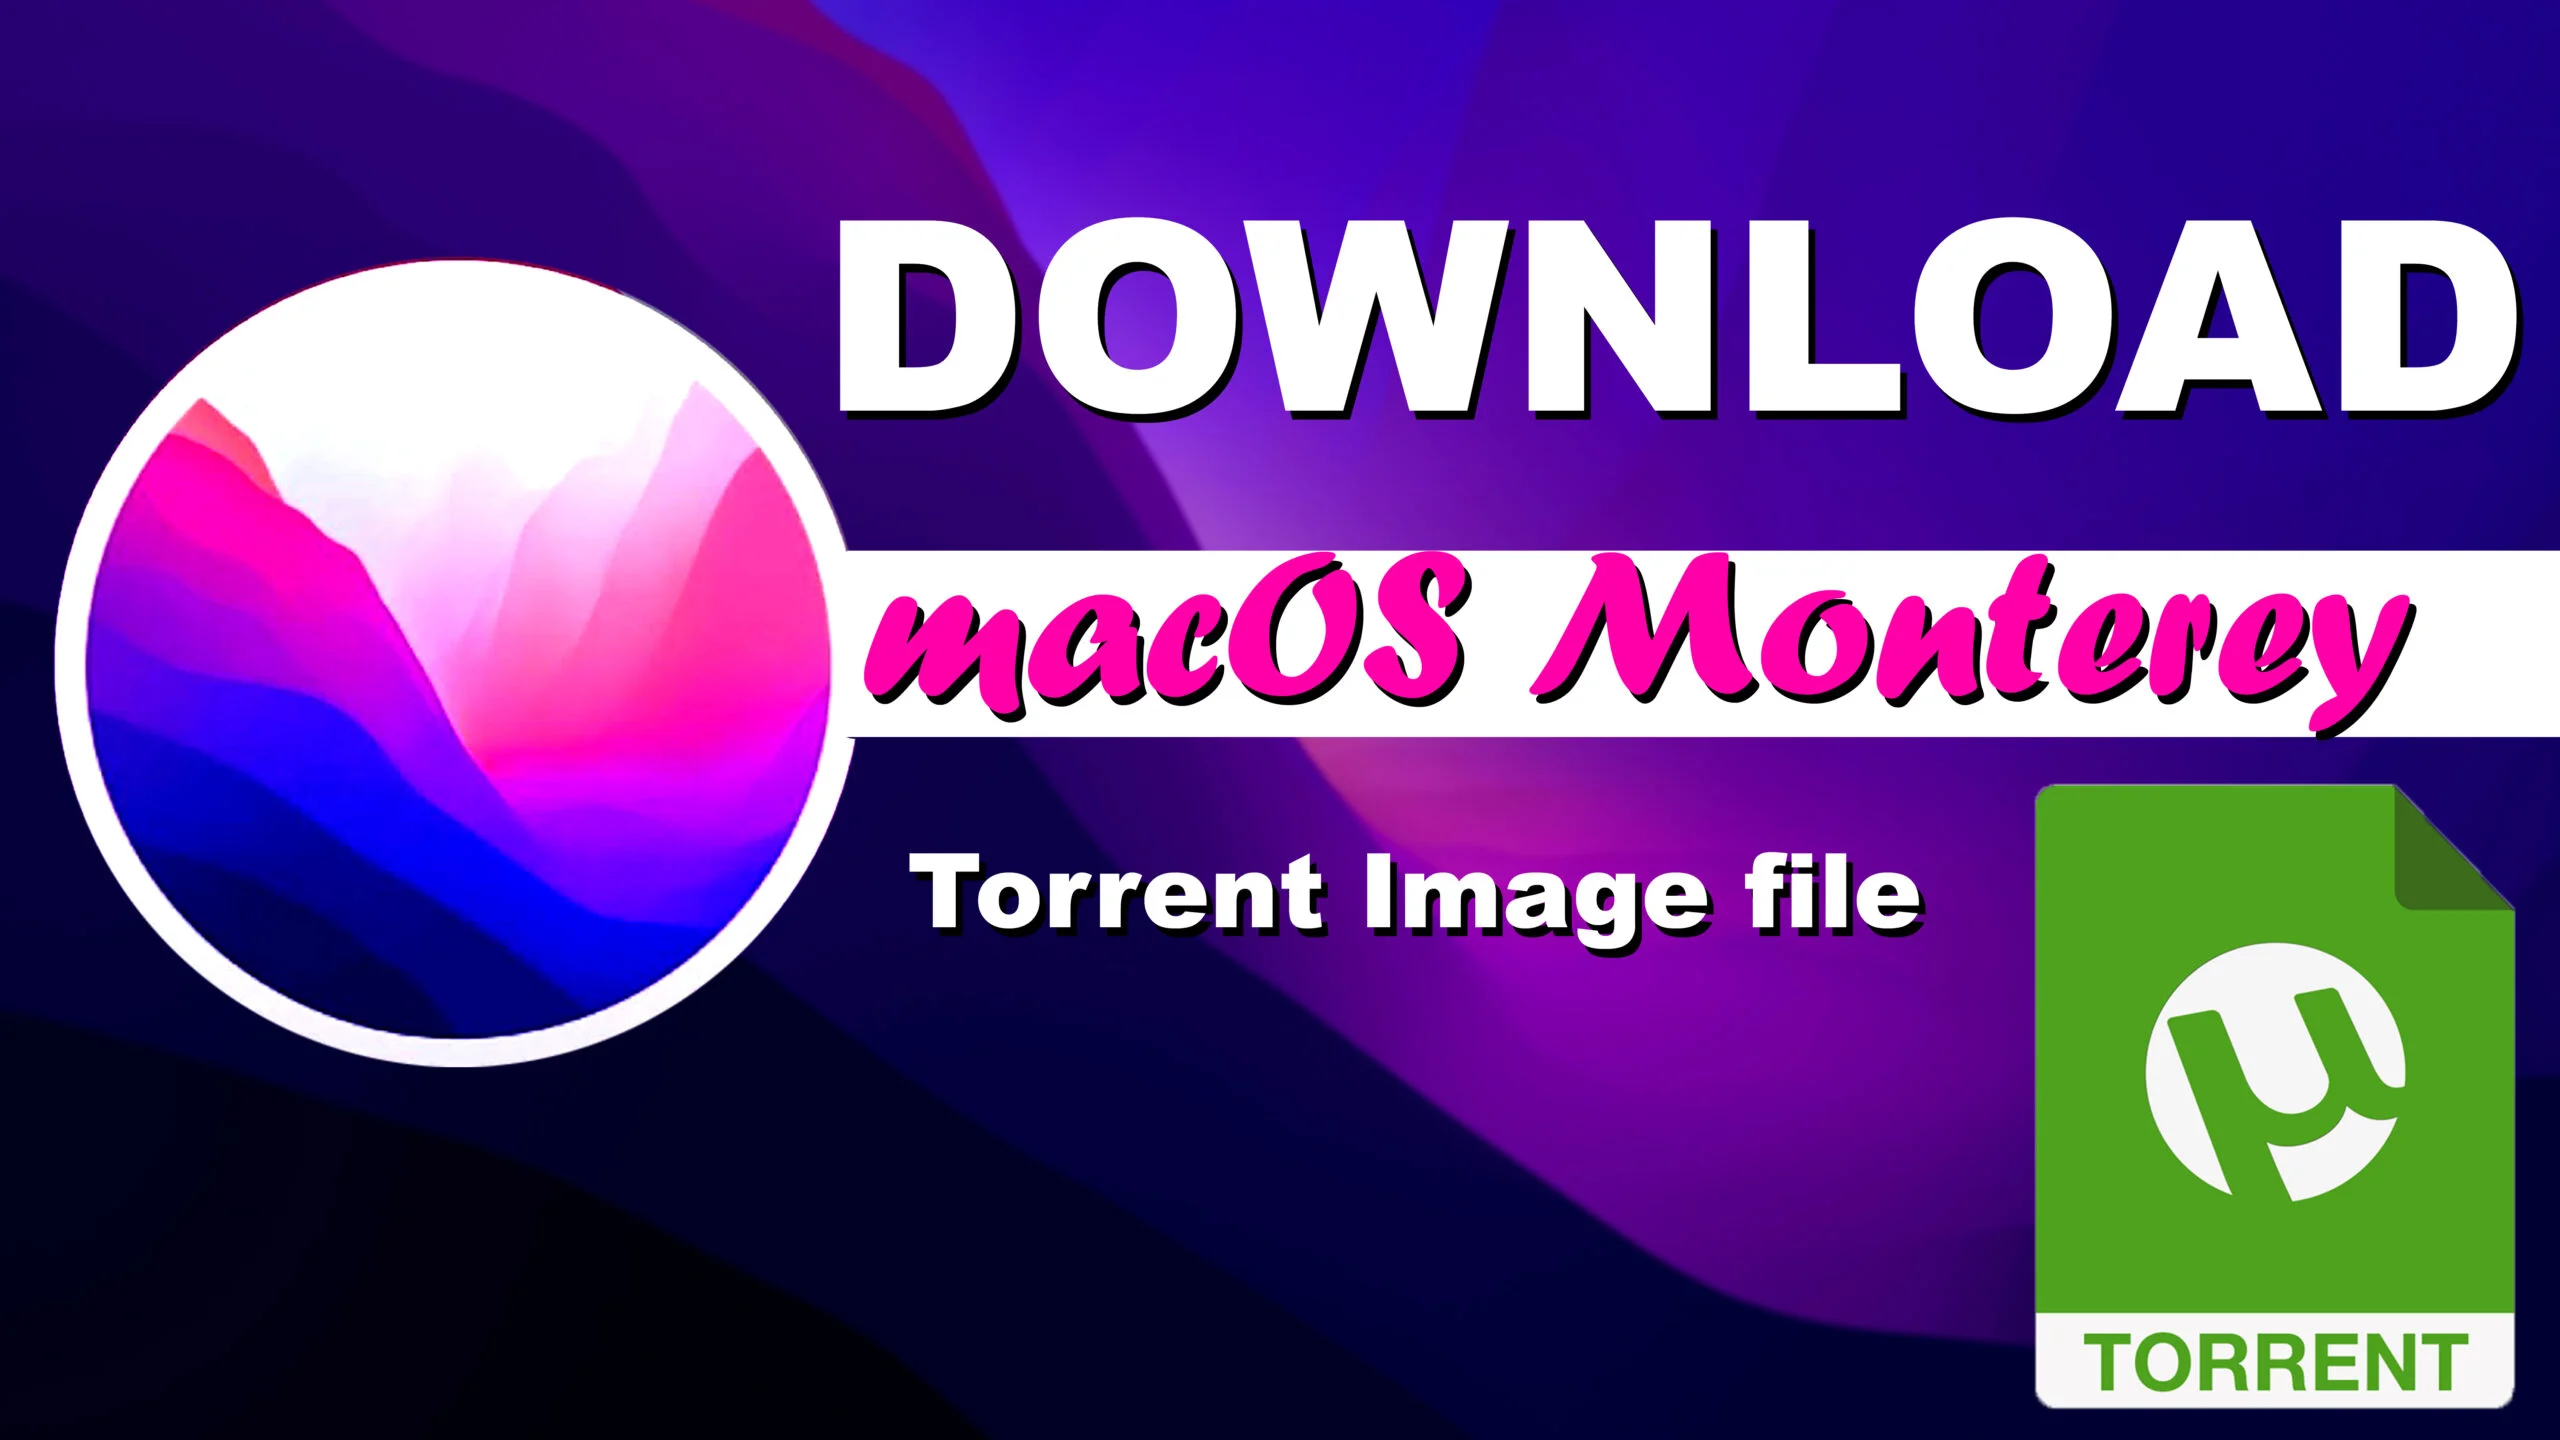 Download macOS Monterey Torrent Image Files For Free